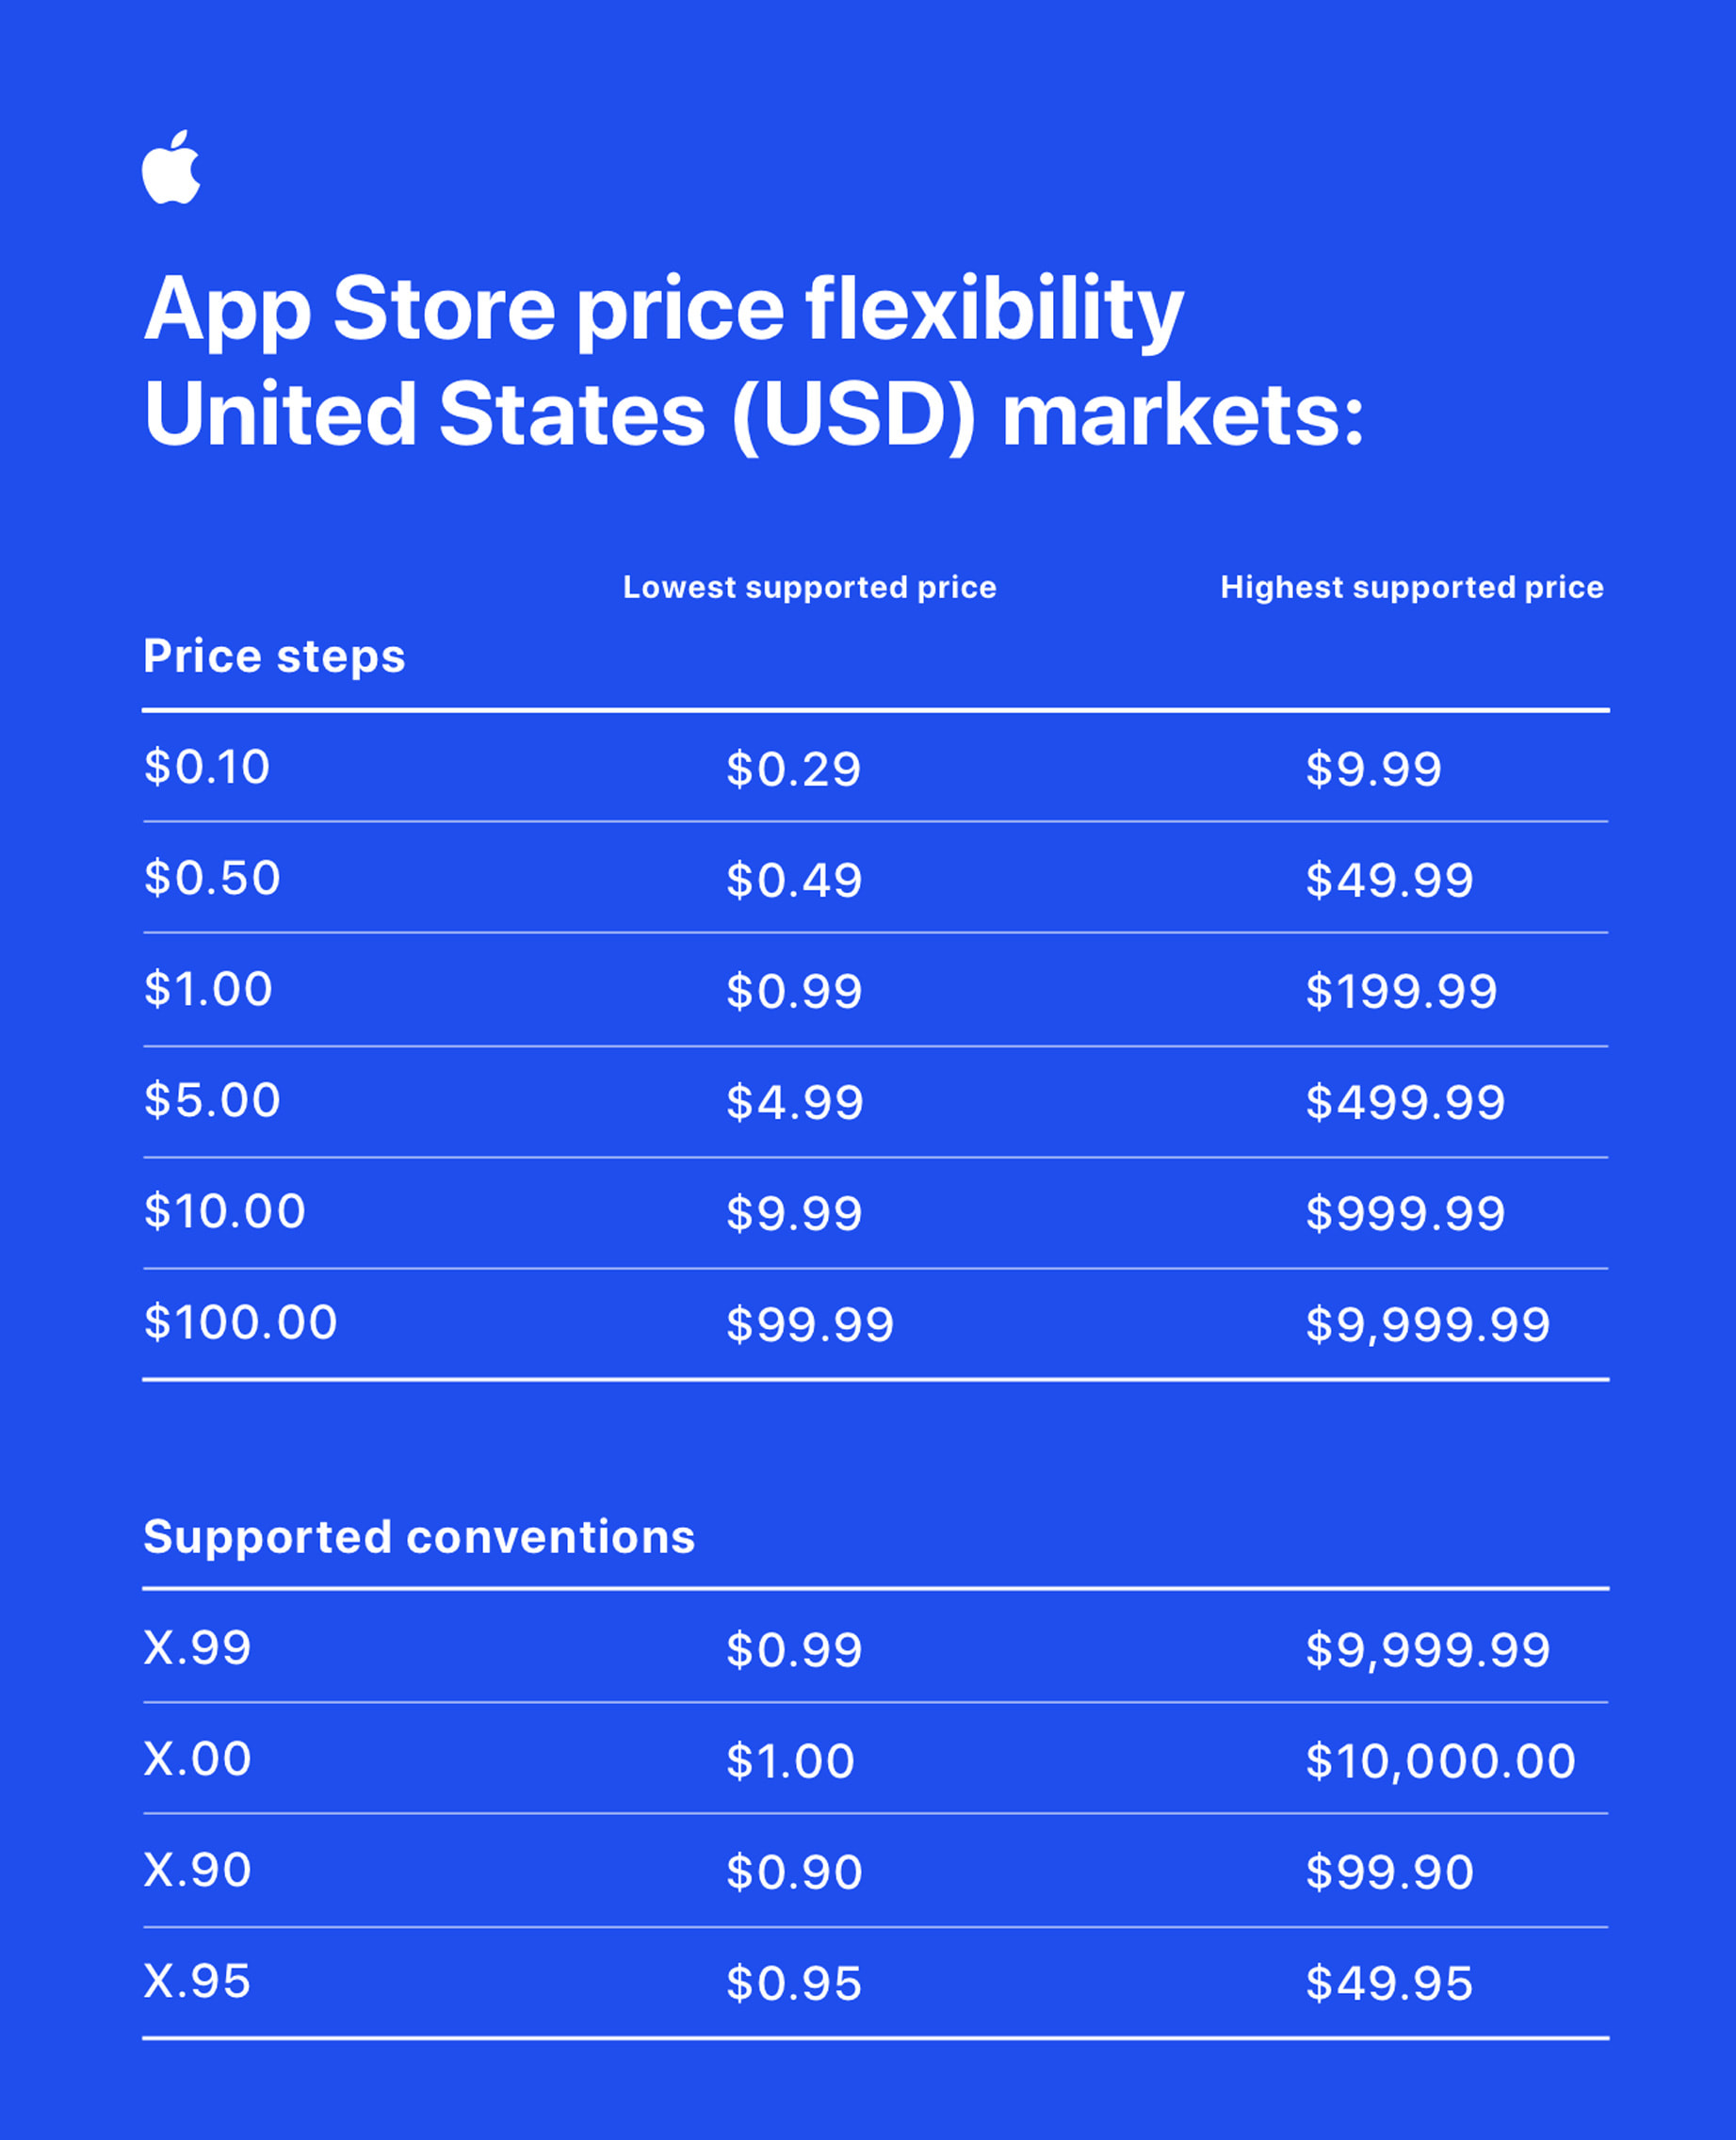 Compare prices for PLEXICLICK across all European  stores